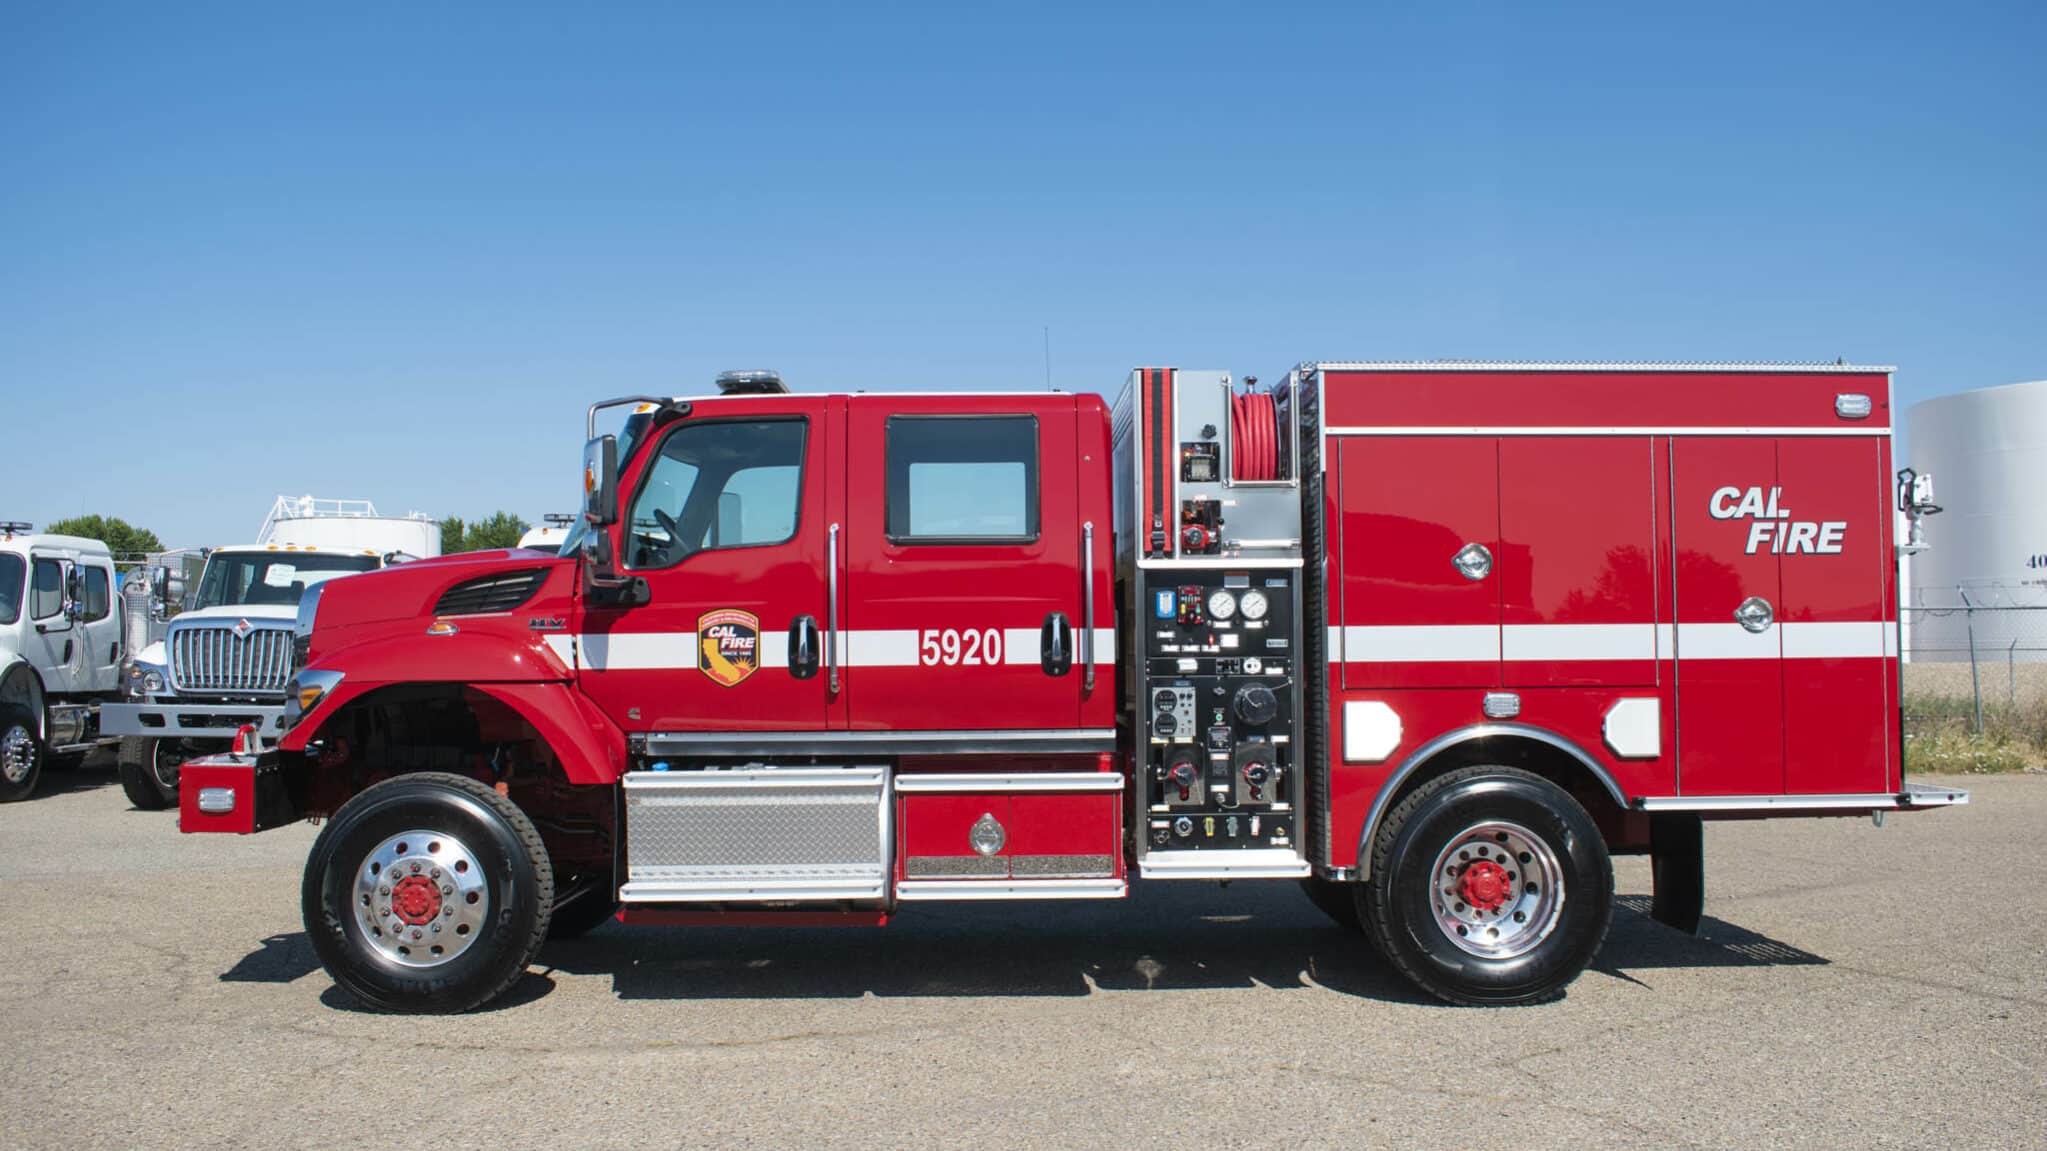 bme delivery 2021 type 3 (model 34) cal fire august 4